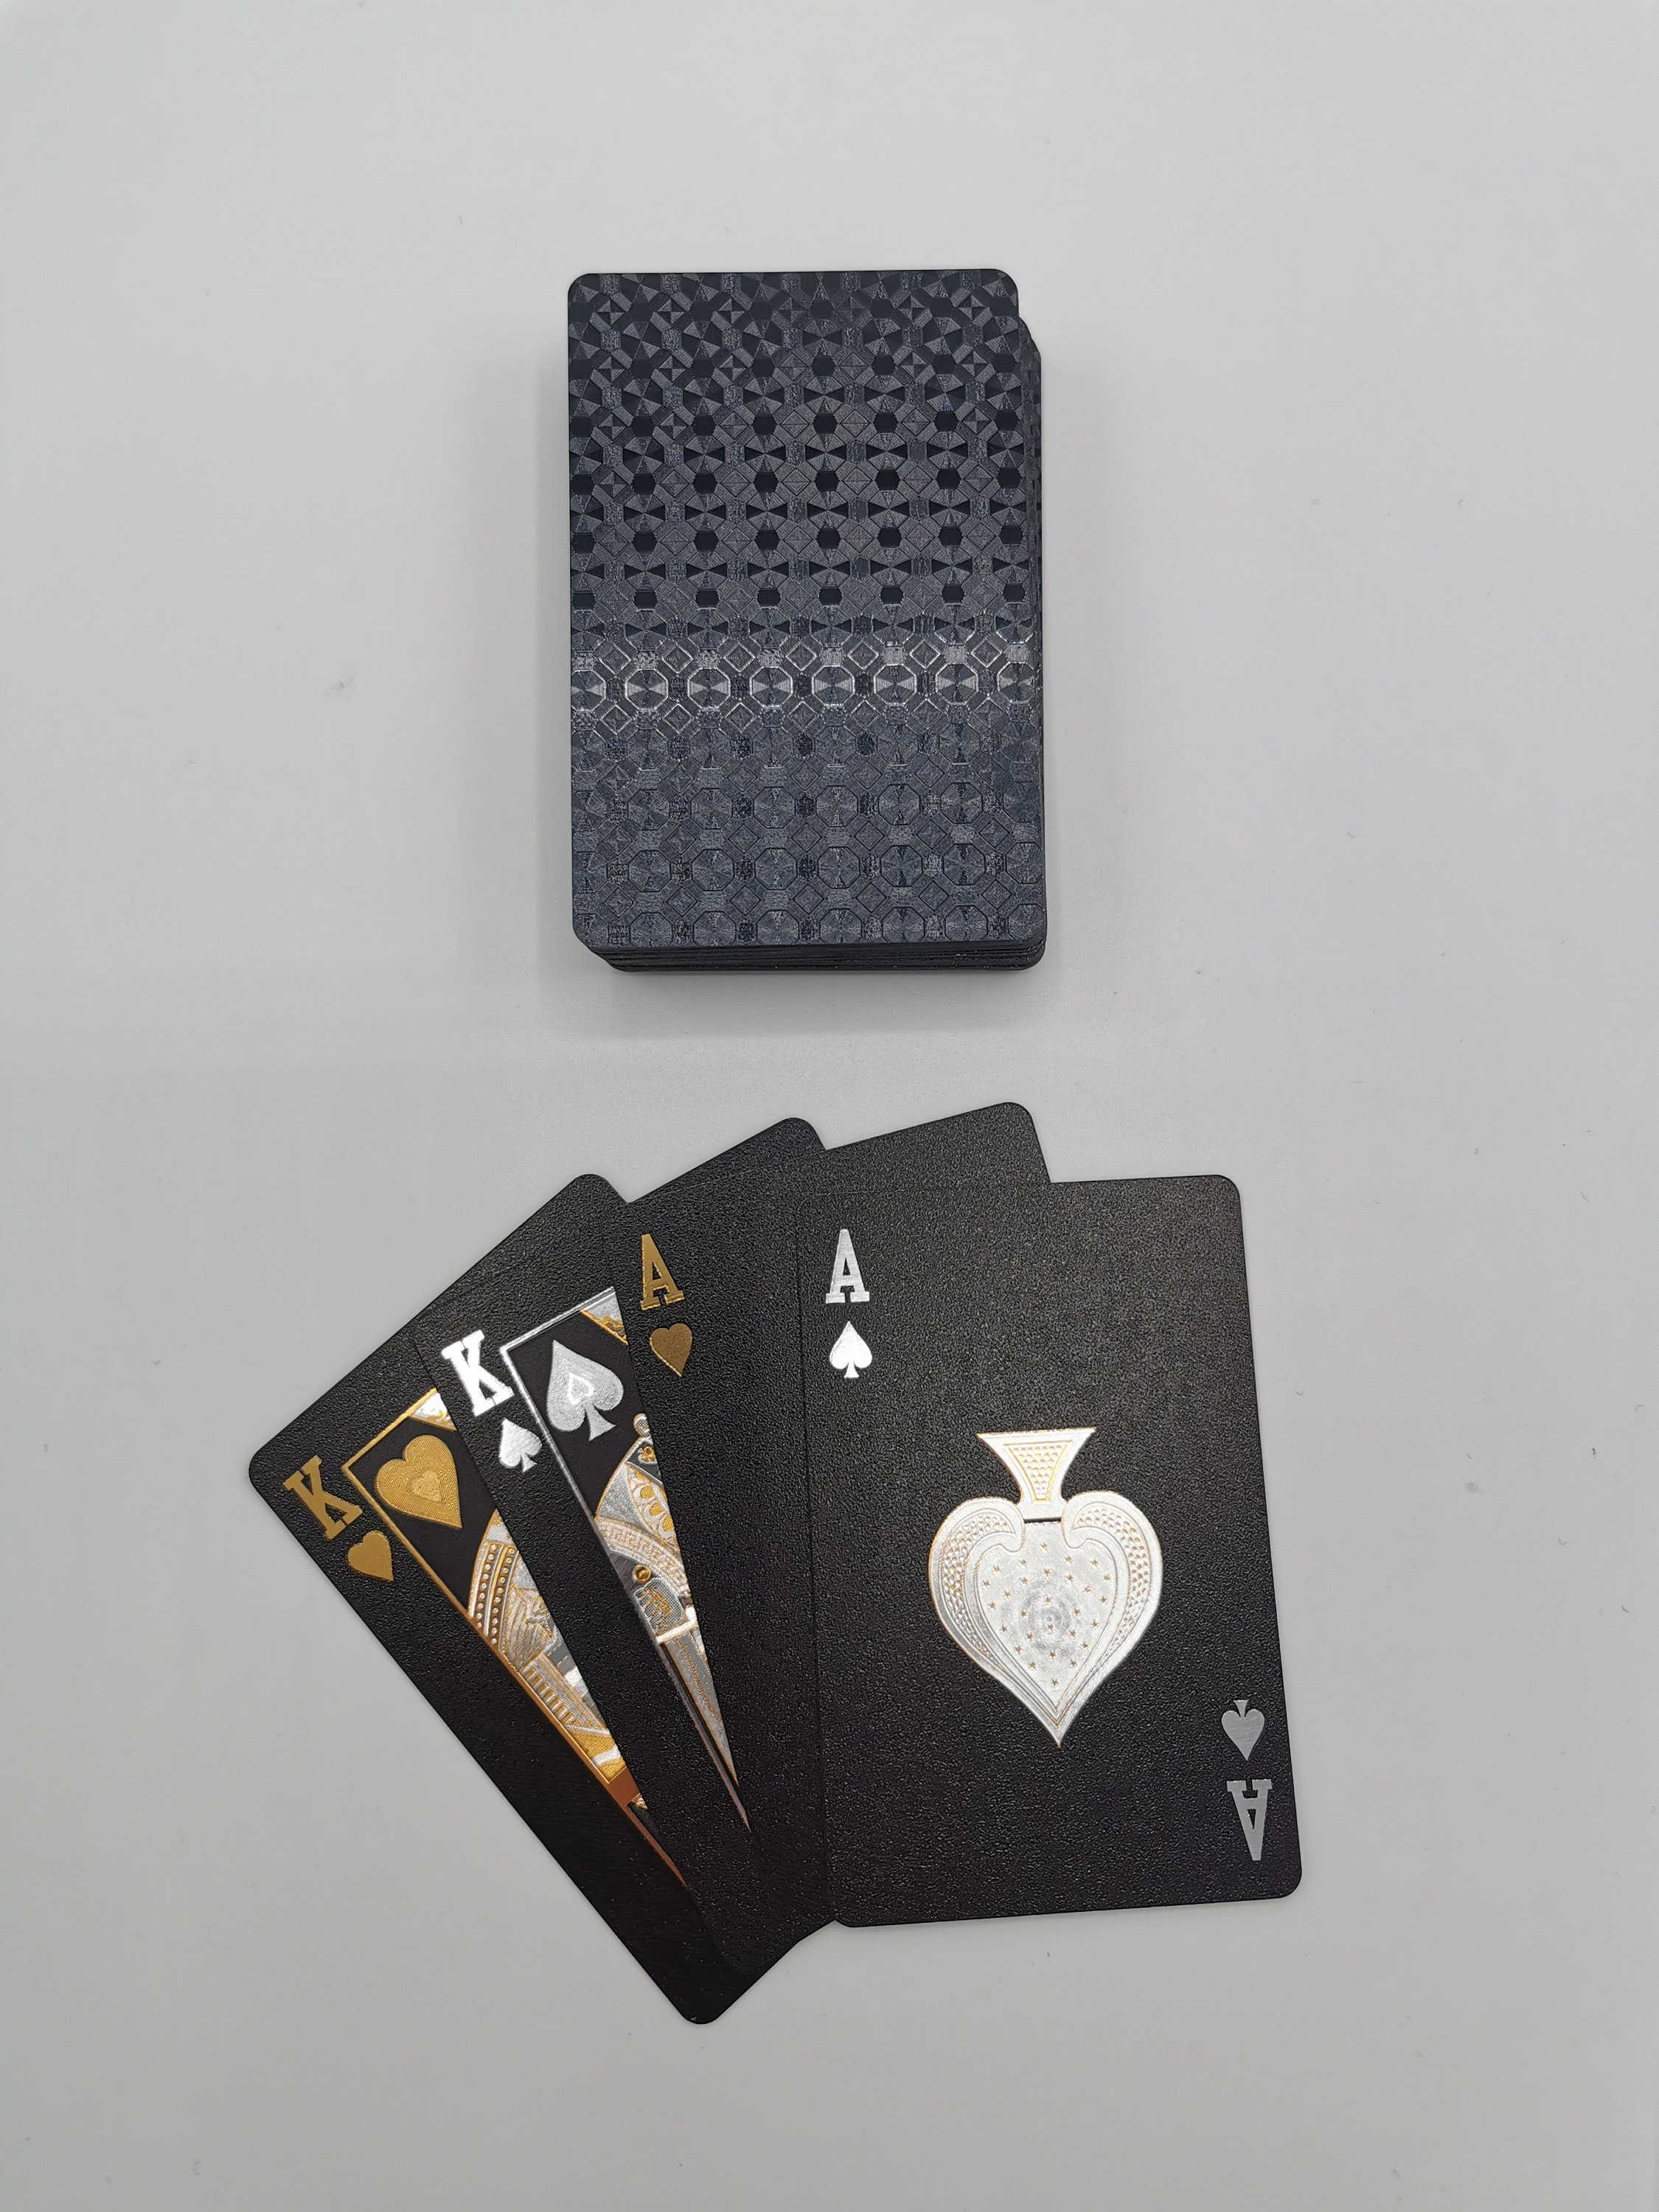 New High-Grade Gold Silver Plated Dollar Pound Shape Plastic Poker Playing Cards 